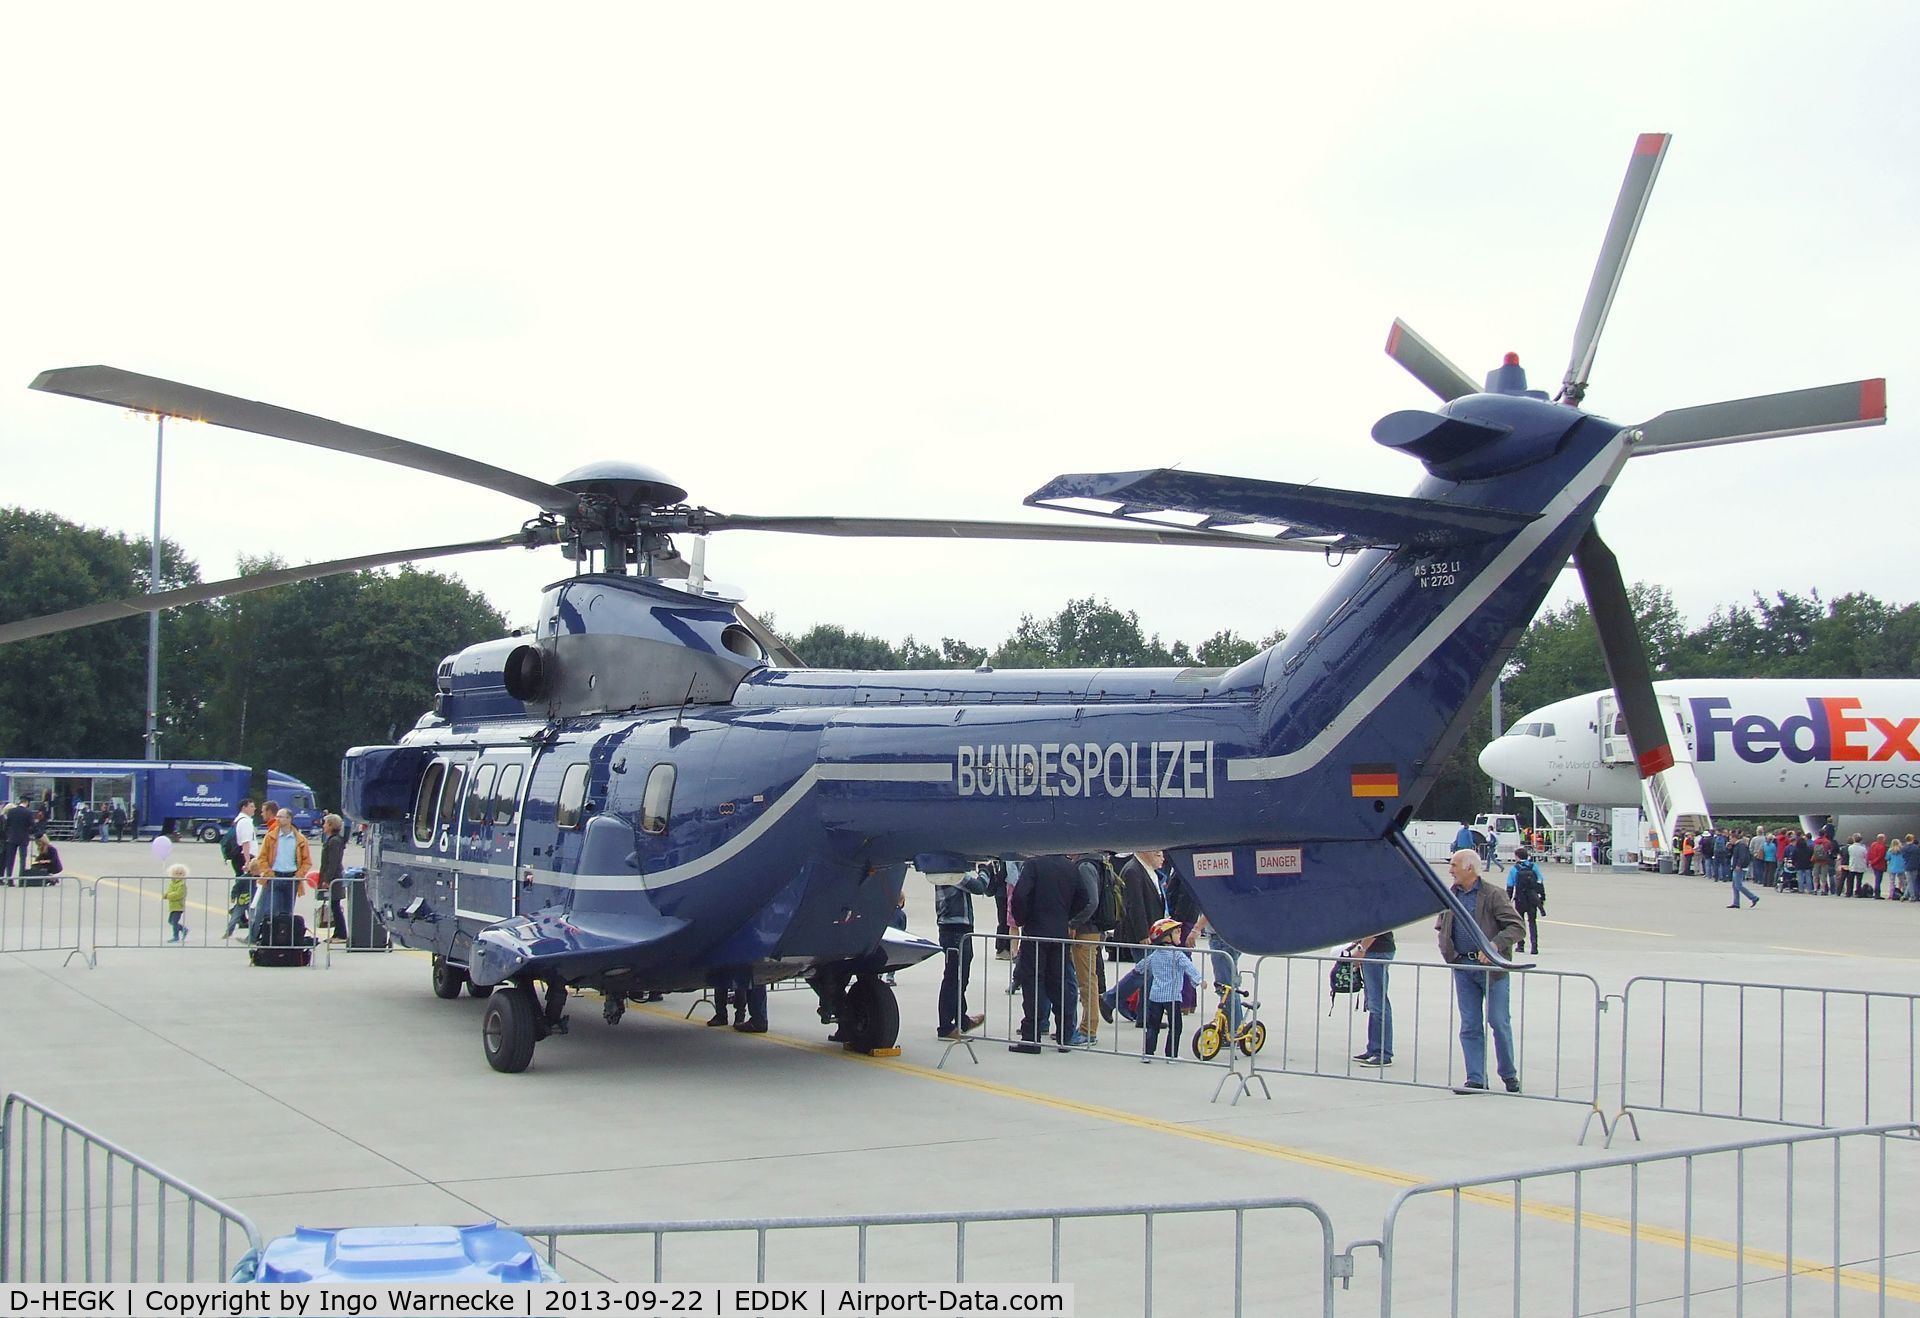 D-HEGK, 2009 Aerospatiale AS-332L-1 Super Puma C/N 2720, Aerospatiale AS.332L1 Super Puma of the German federal police (Bundespolizei) at the DLR 2013 air and space day on the side of Cologne airport